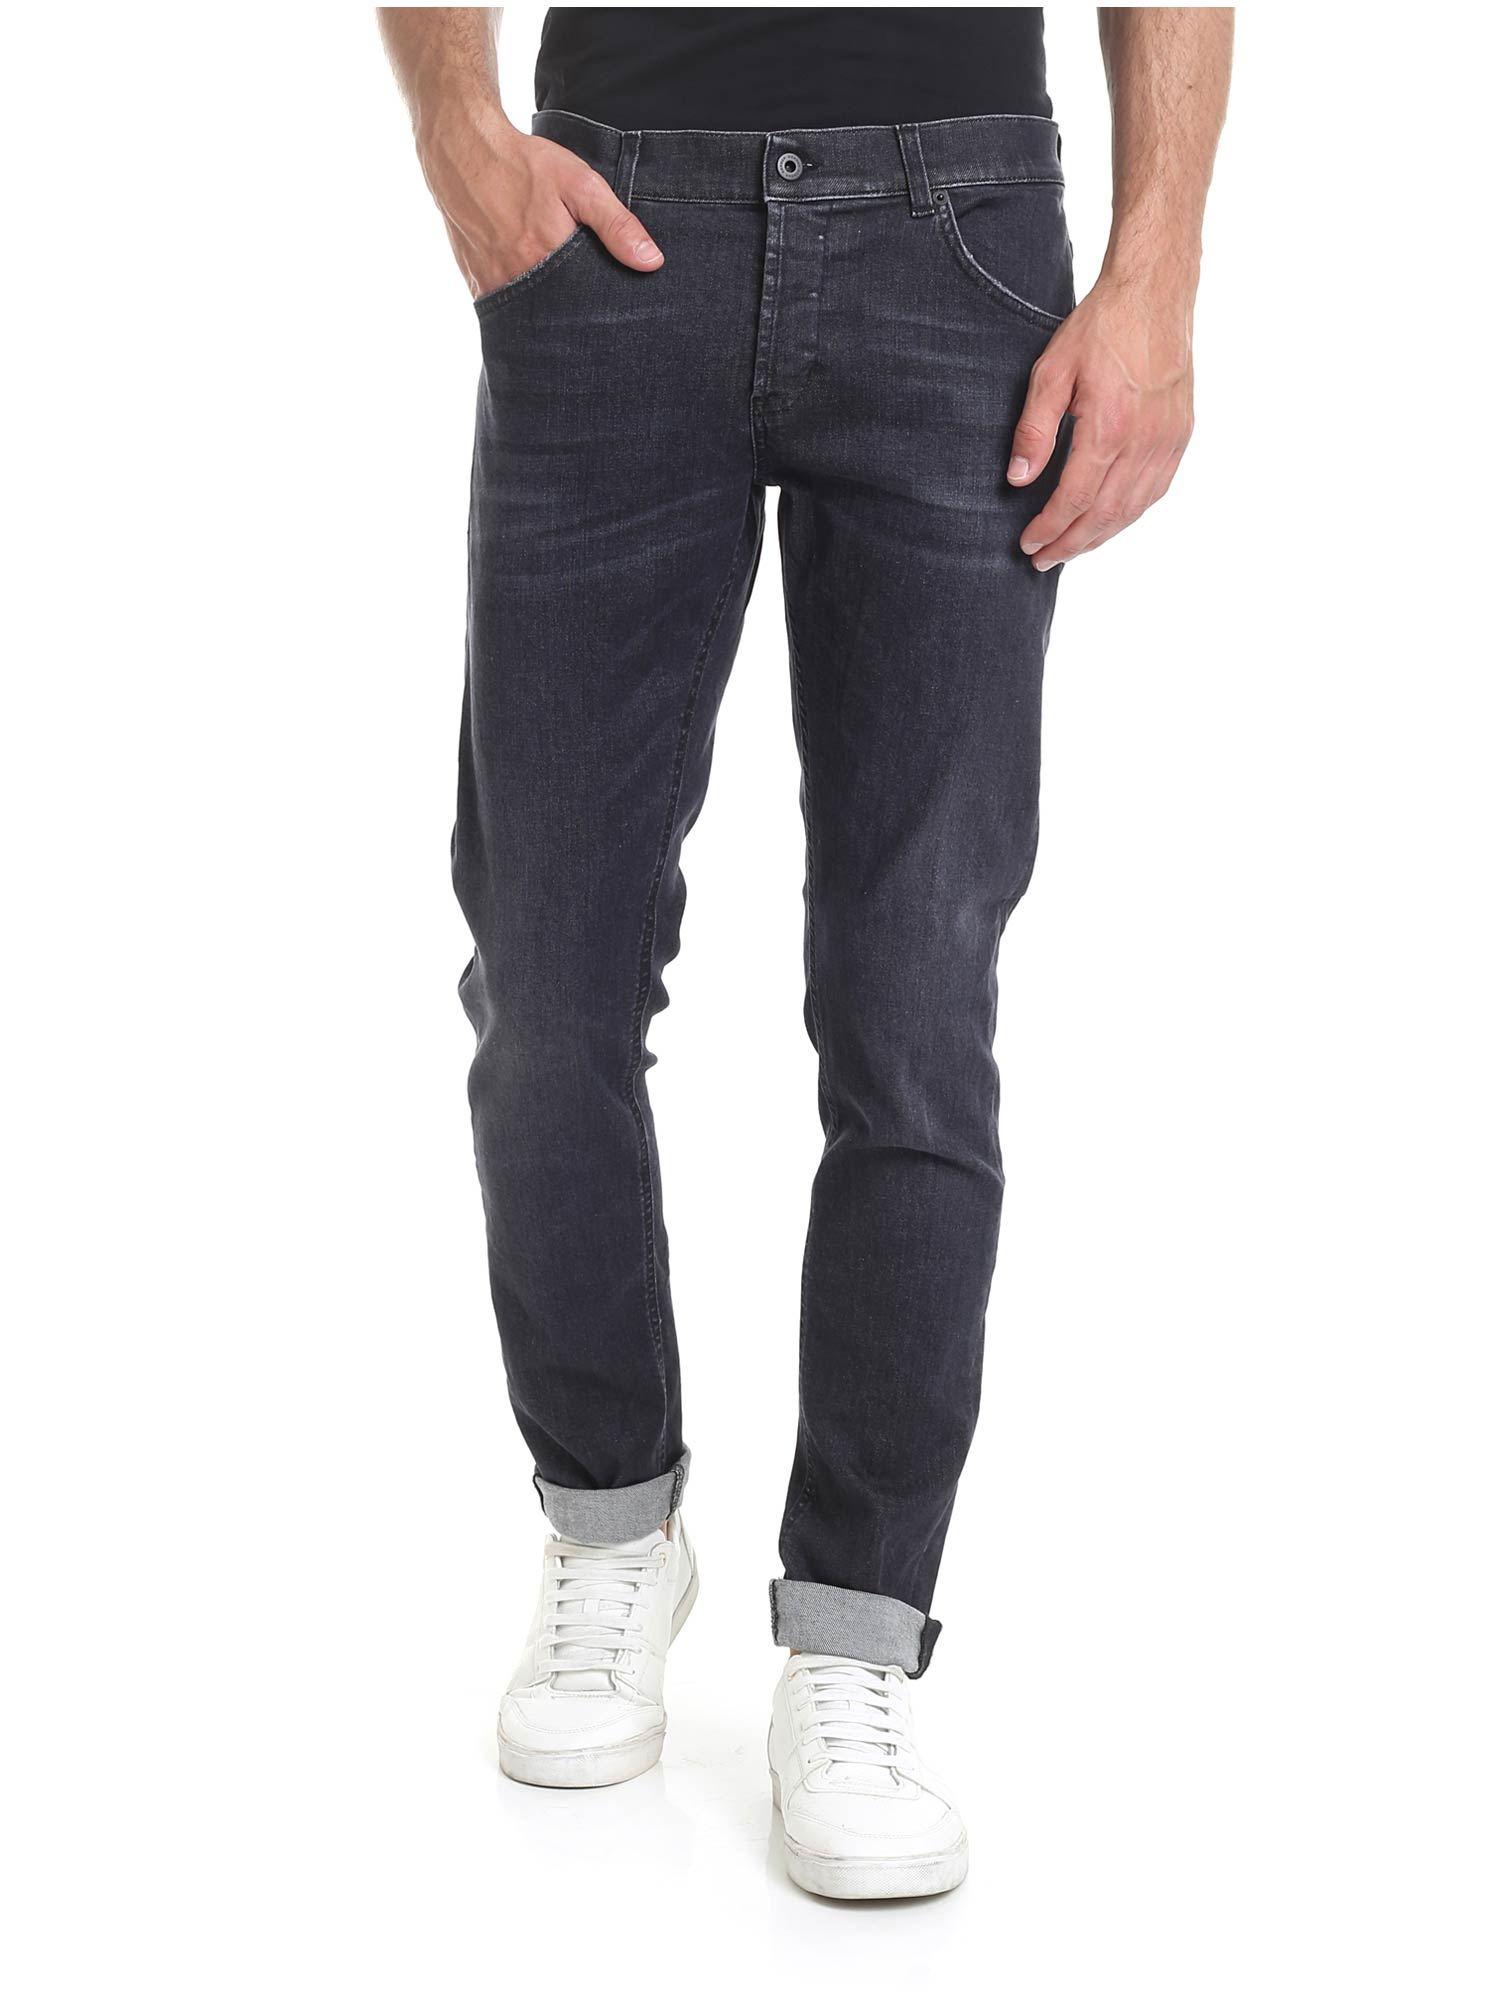 Dondup Denim Ritchie Jeans In Gray for Men - Lyst